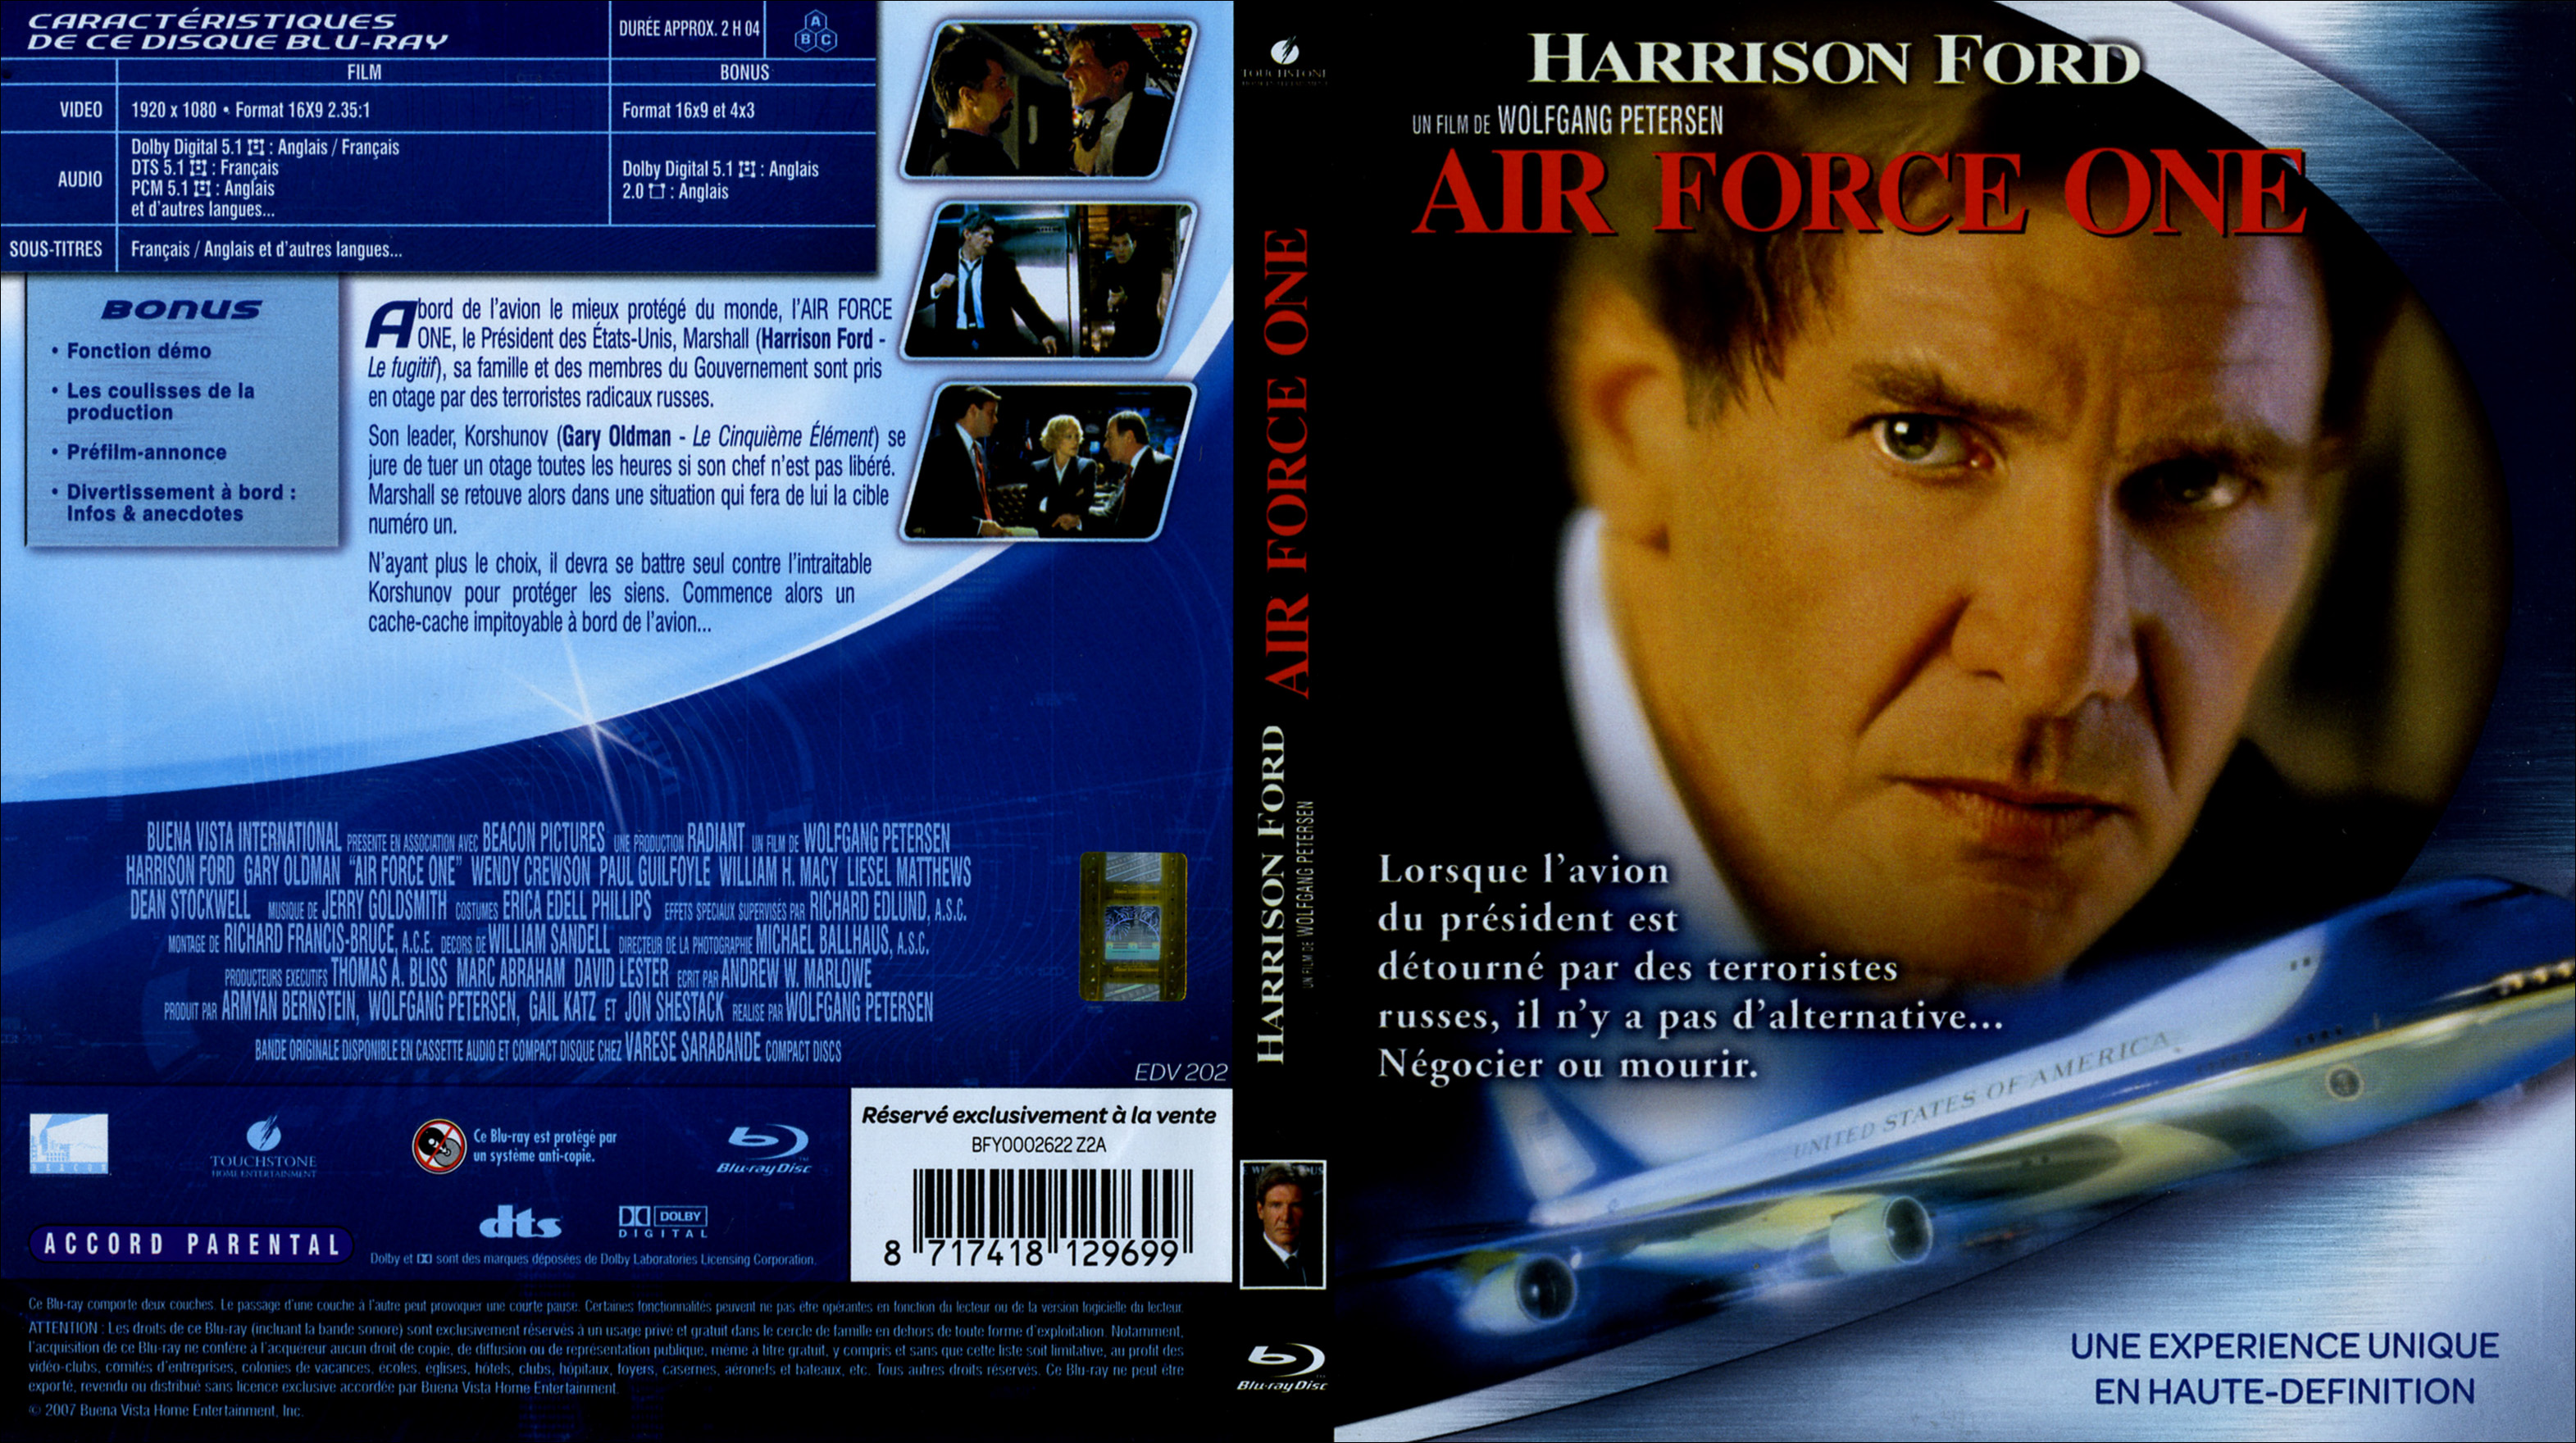 Jaquette DVD Air force one (BLU-RAY)